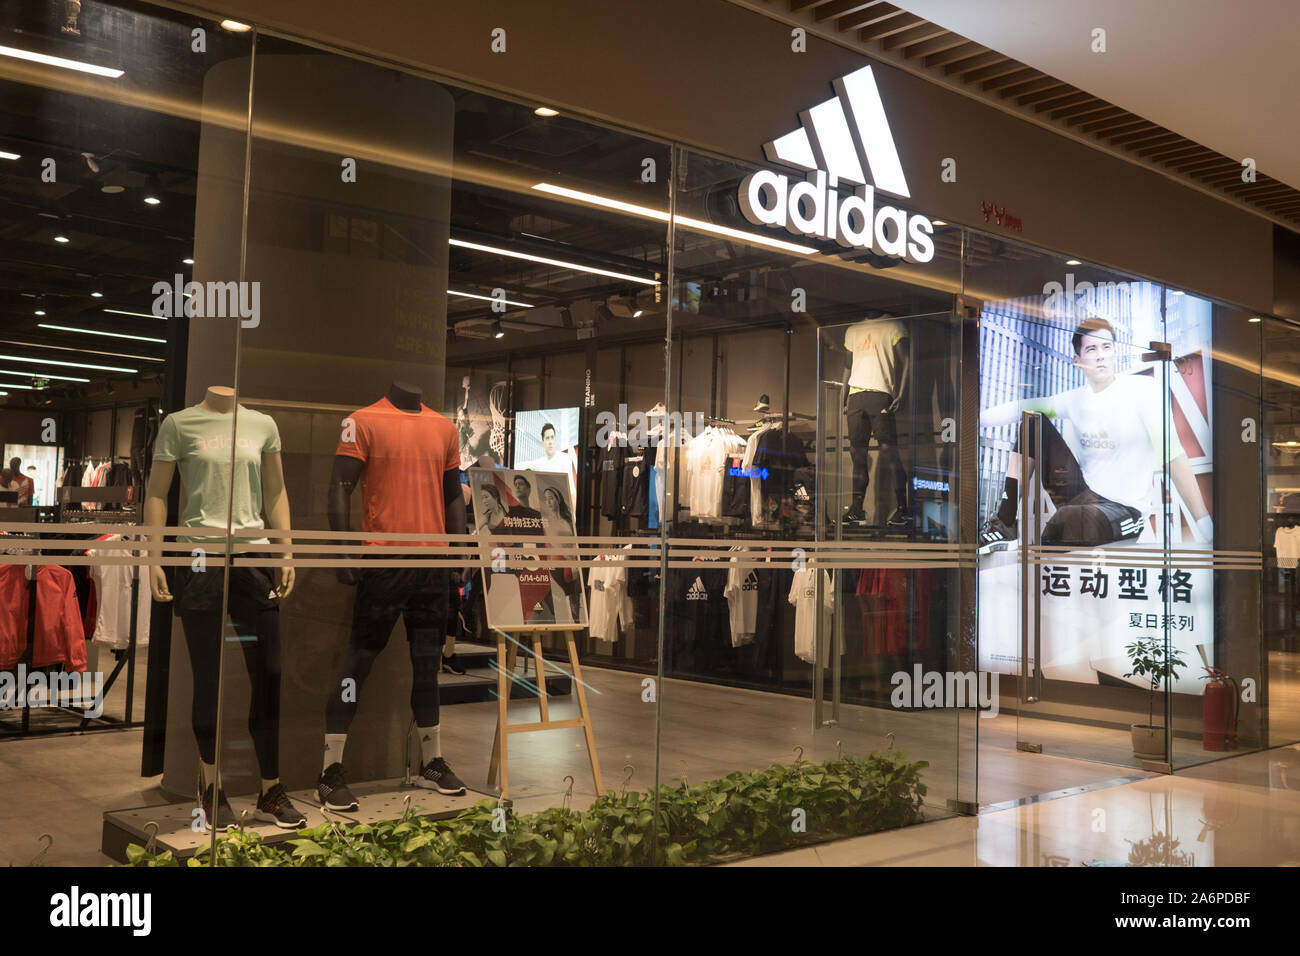 ADIDAS in China: Shop facade during a special sale, This Famous German brand makes popular sports clothing, China 17 june 2019 Stock Photo